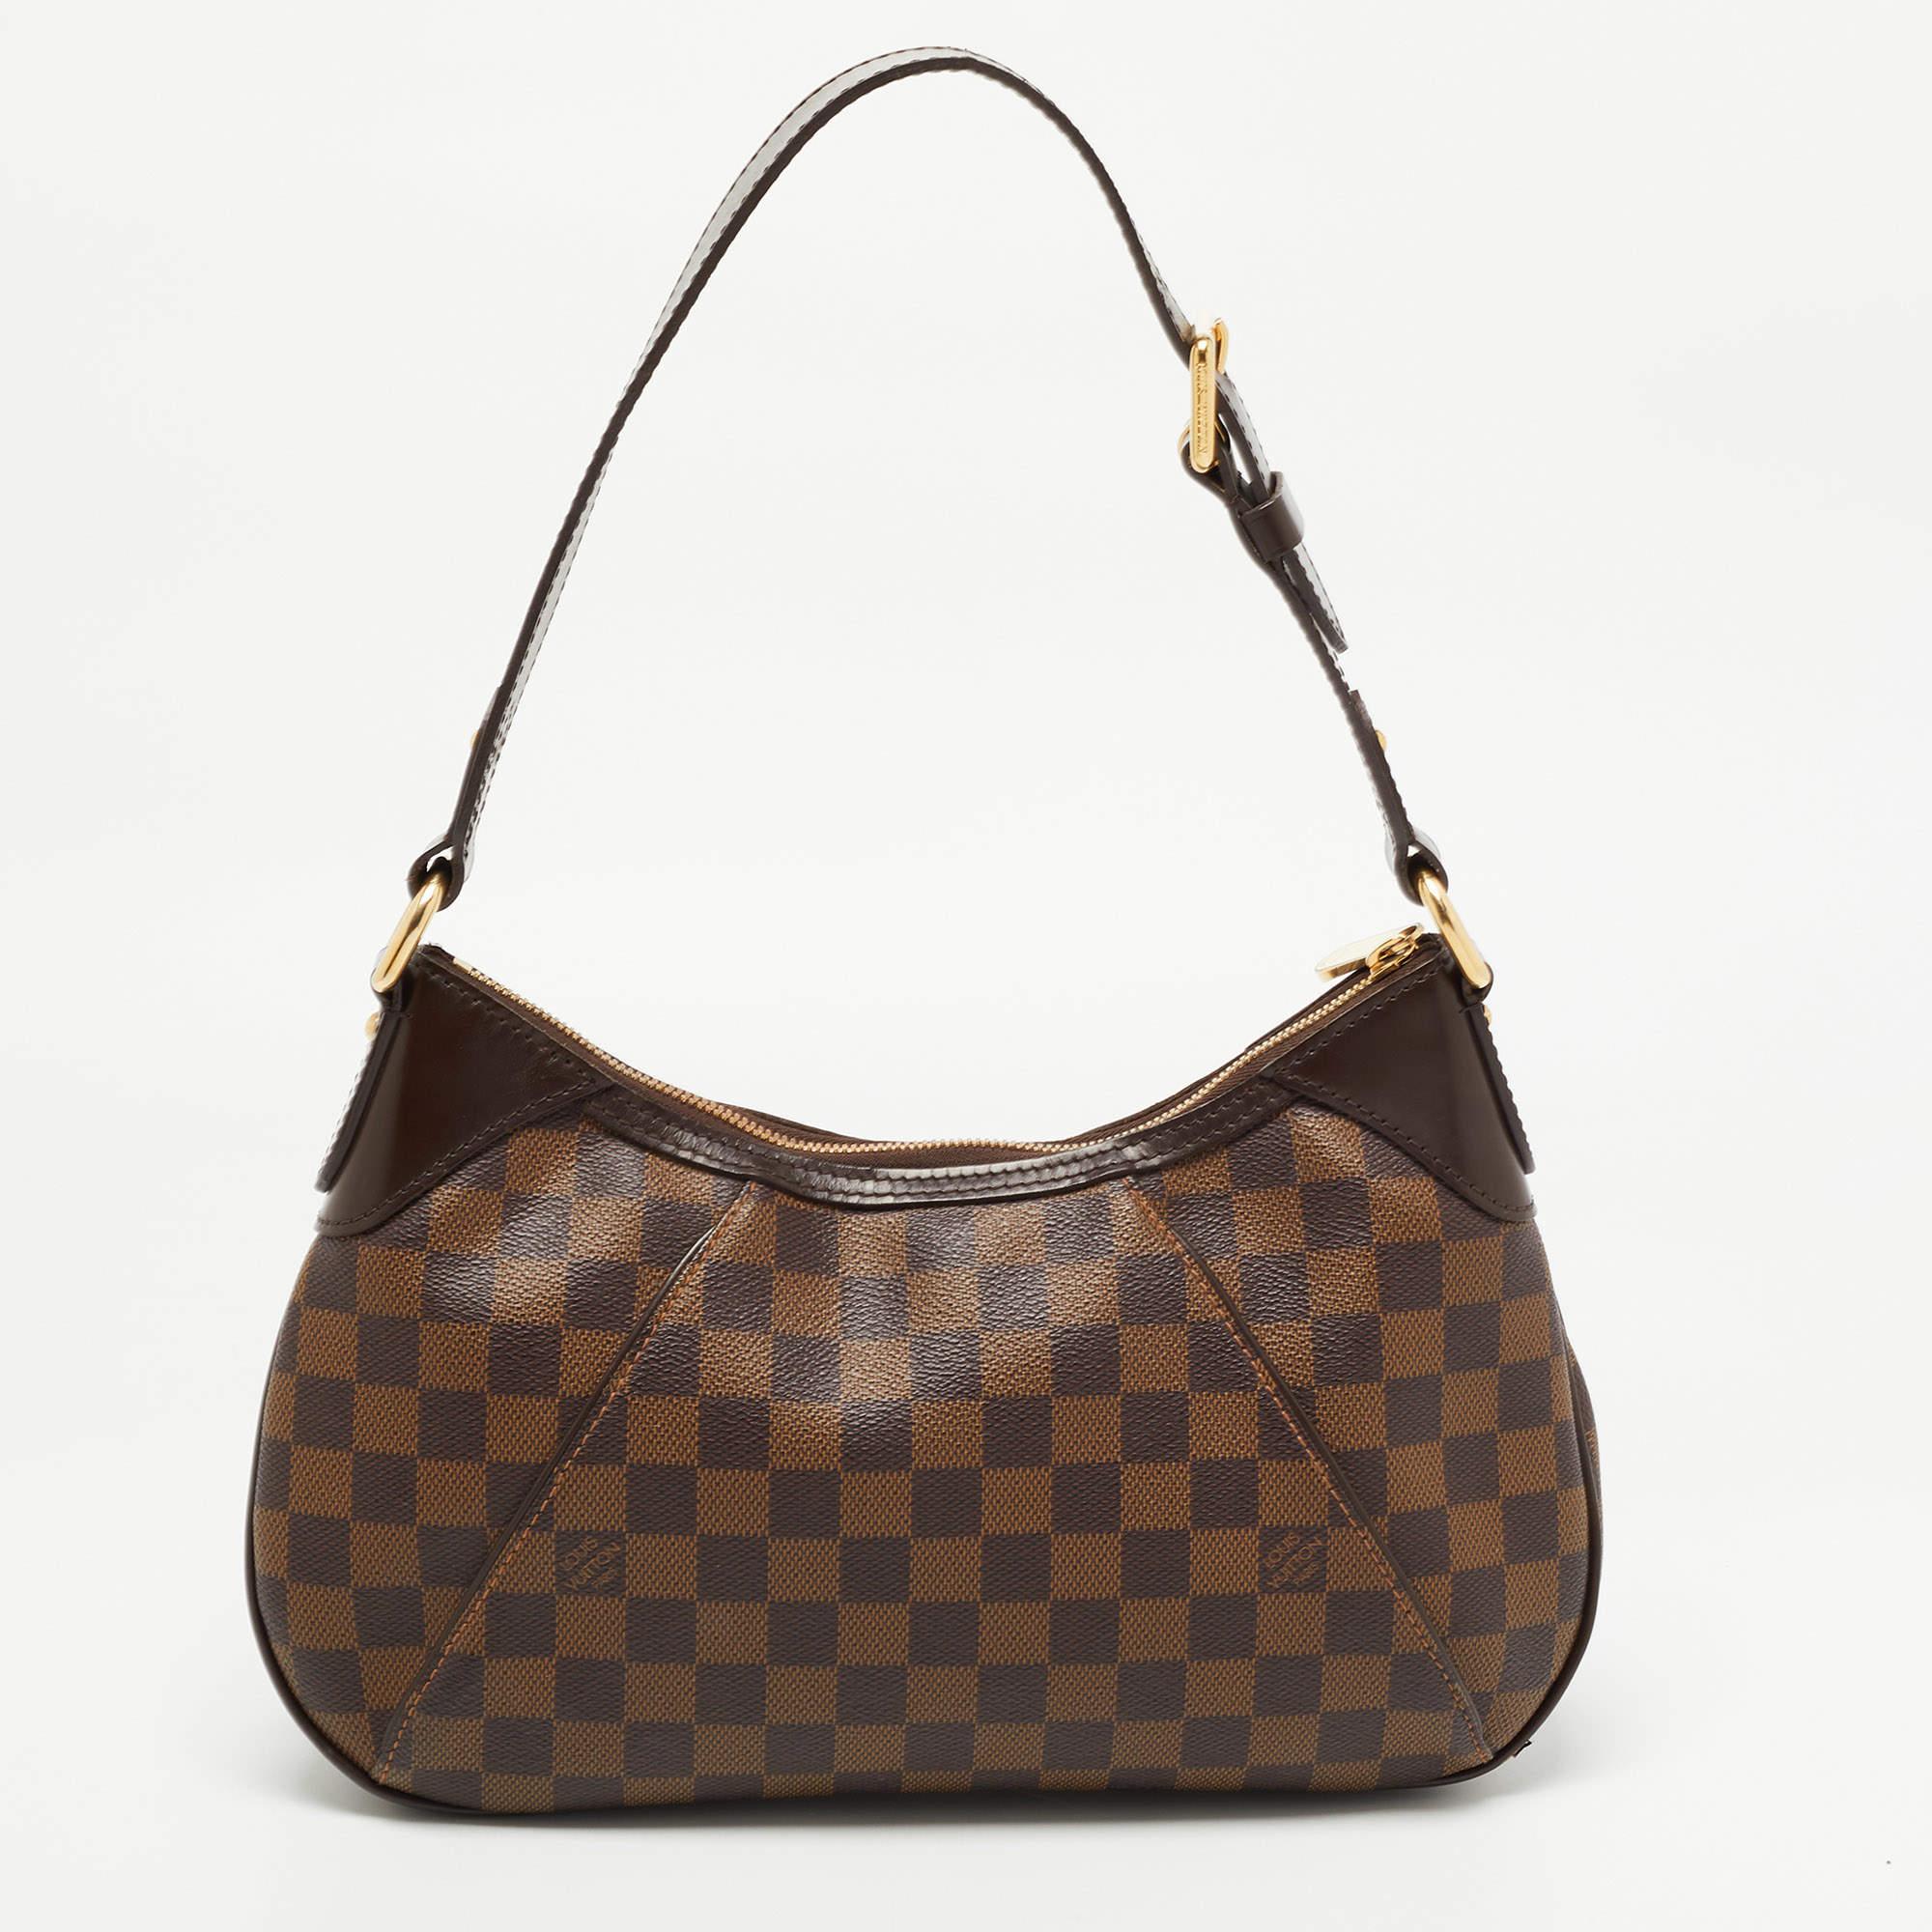 Louis Vuitton's handbags are popular owing to their high style and functionality. This Thames PM bag is crafted from signature Damier Ebene canvas and comes with a shoulder strap. The zip top closure opens to a canvas-lined interior that will house